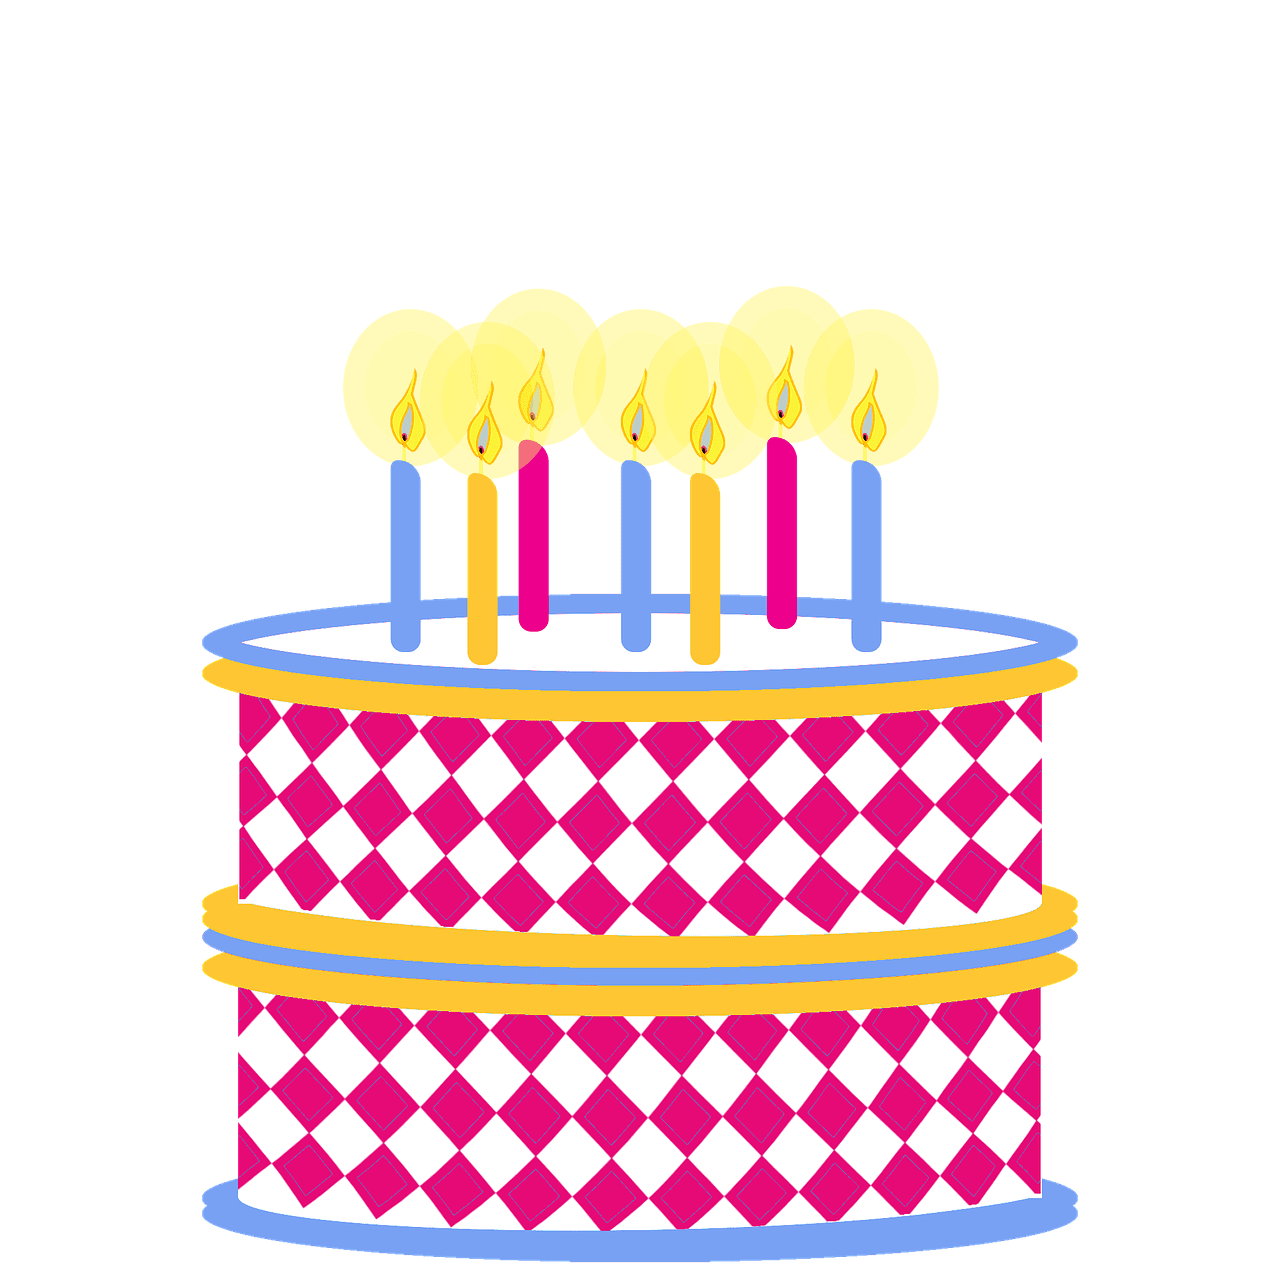 Birthday party clipart cake colorful image